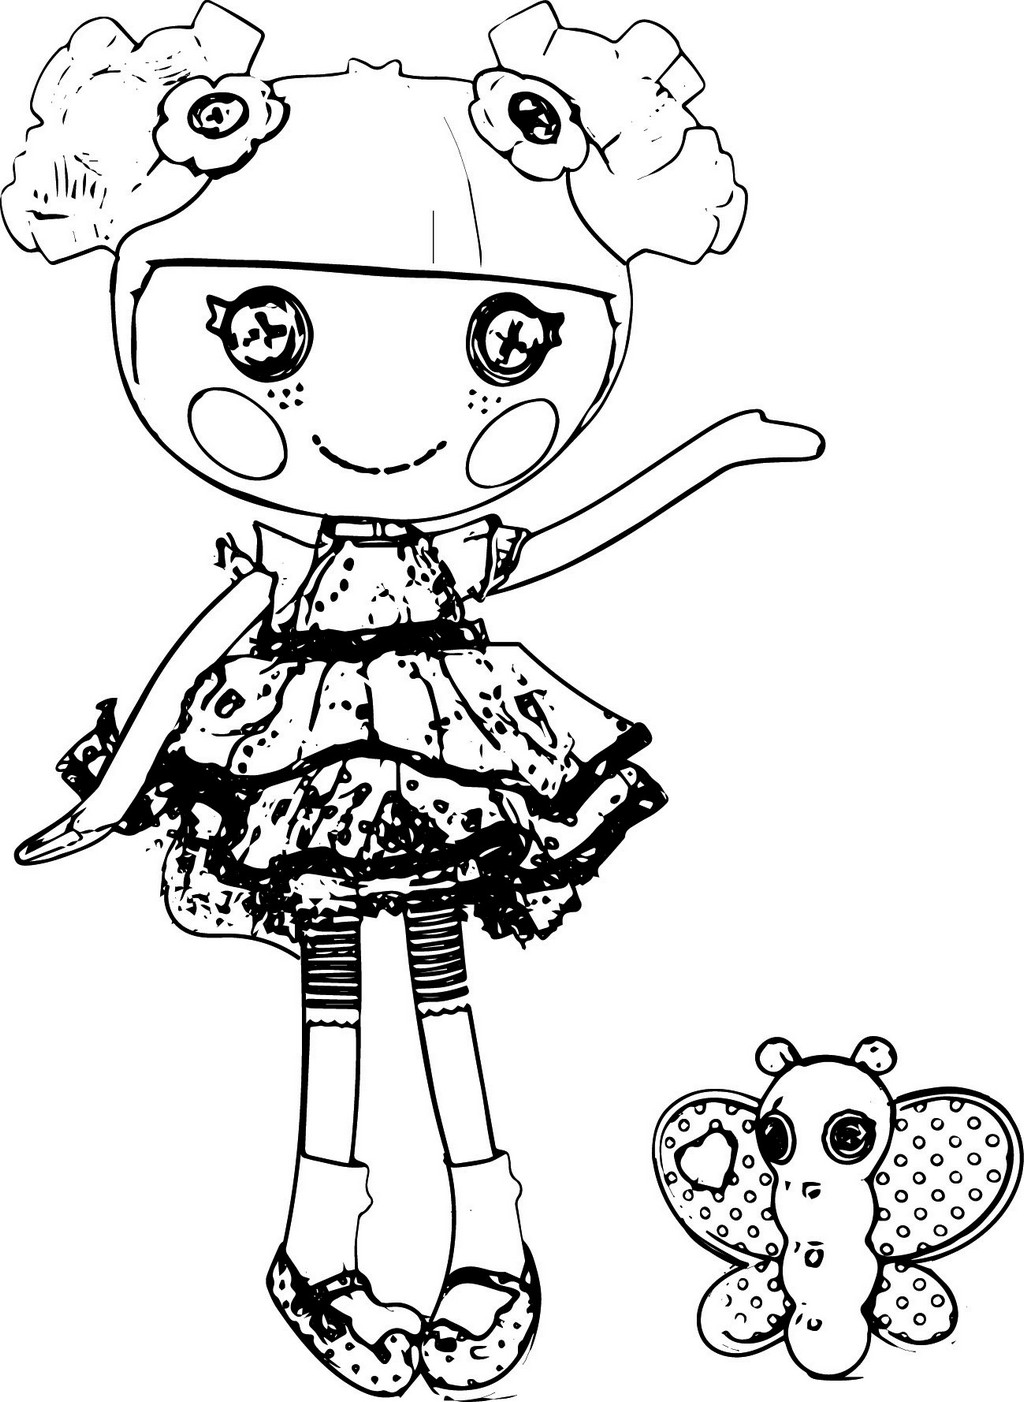 Blossom Flowerpot Lalaloopsy coloring page dolls